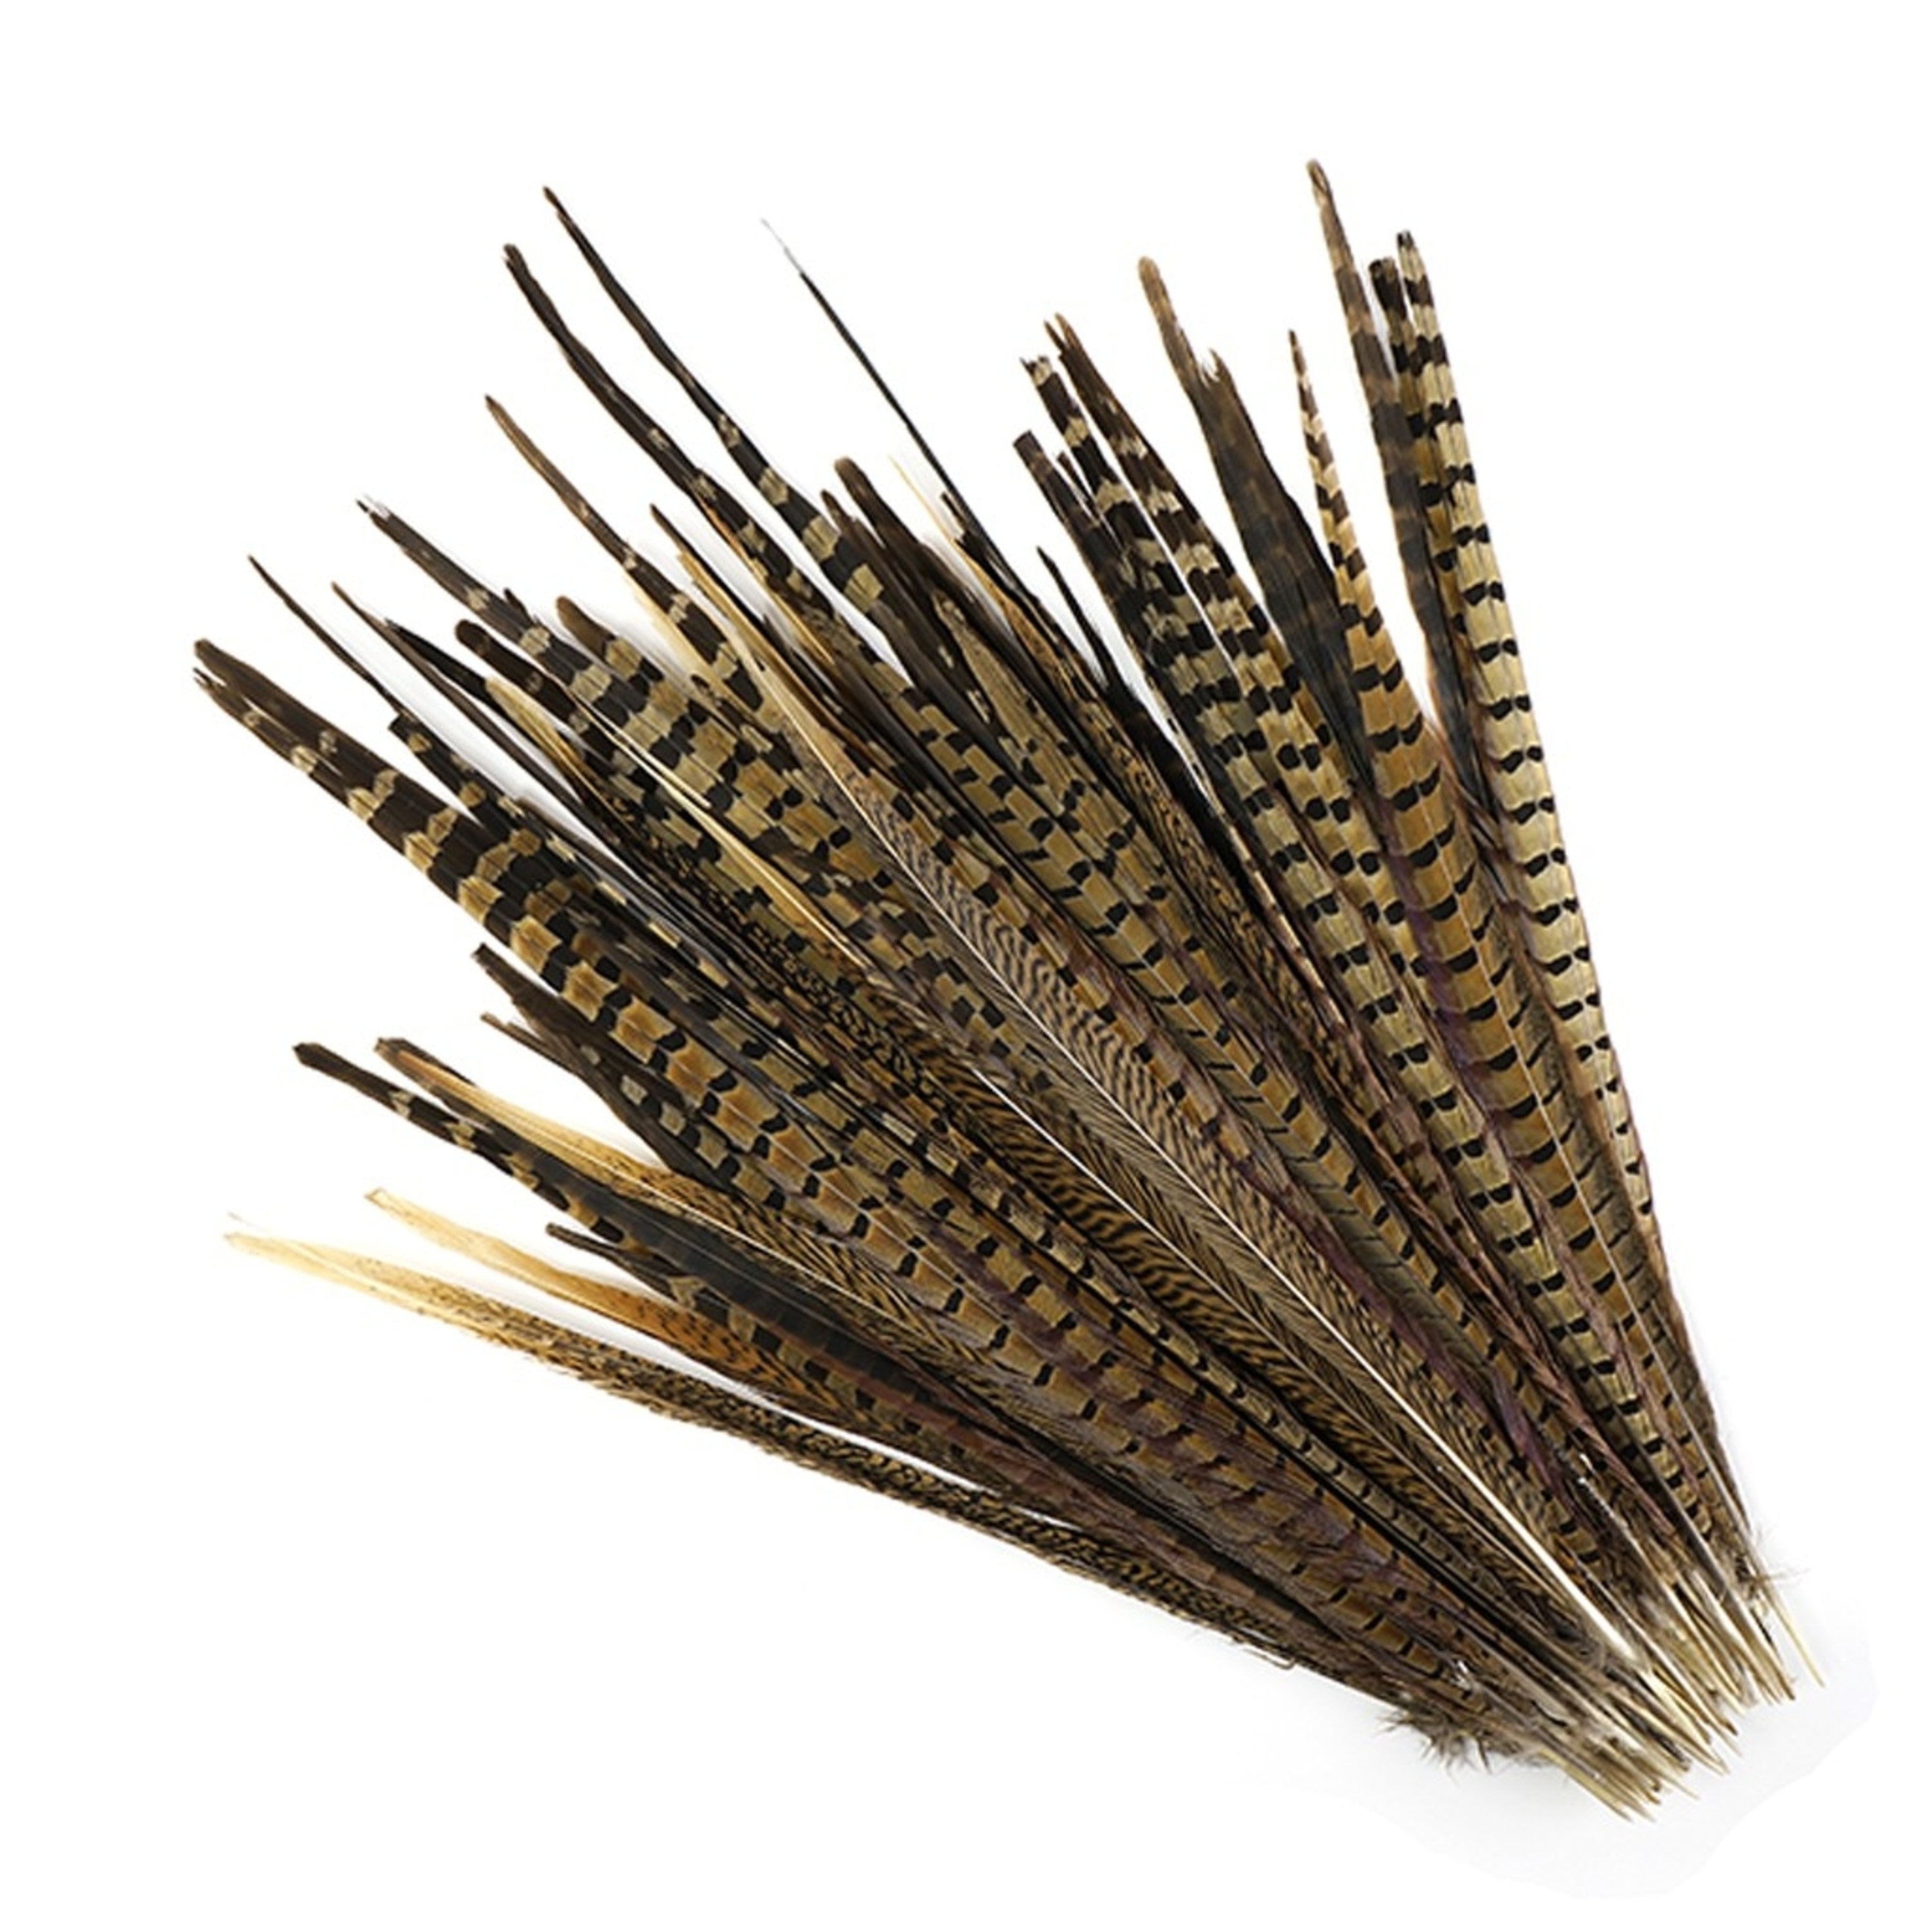 20pcs, Peacock Feathers, REAL Feathers, Natural Feathers, 23-30 Cm, Feather  Crafts, Floral Arranging, Bird Feathers, Feather Hair Clip 